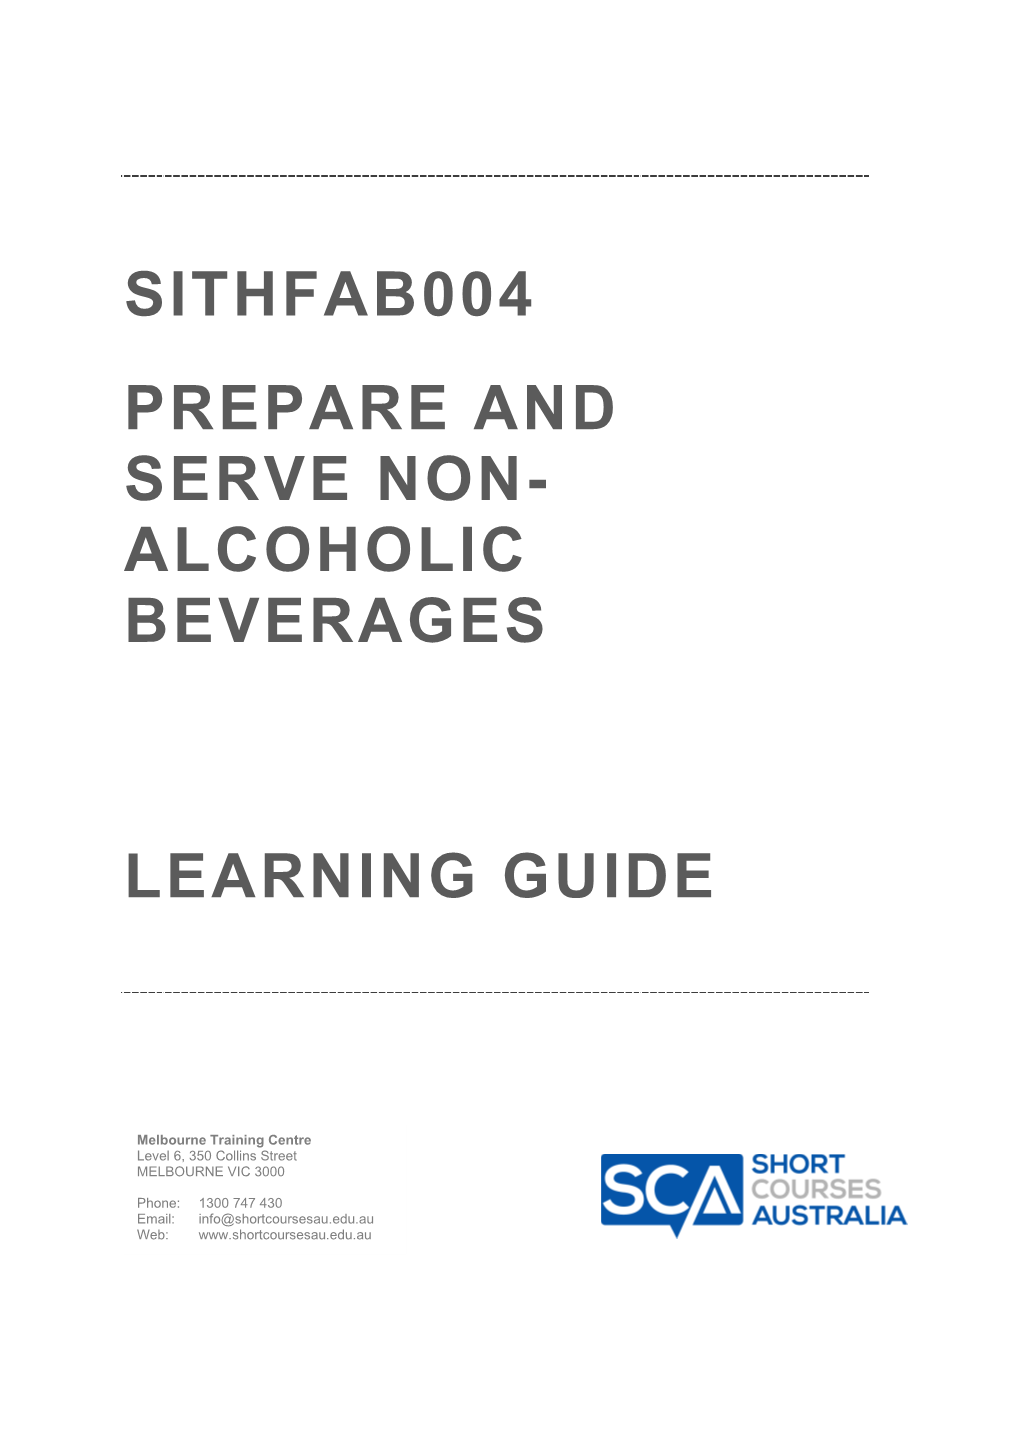 Sithfab004 Prepare and Serve Non- Alcoholic Beverages Learning Guide